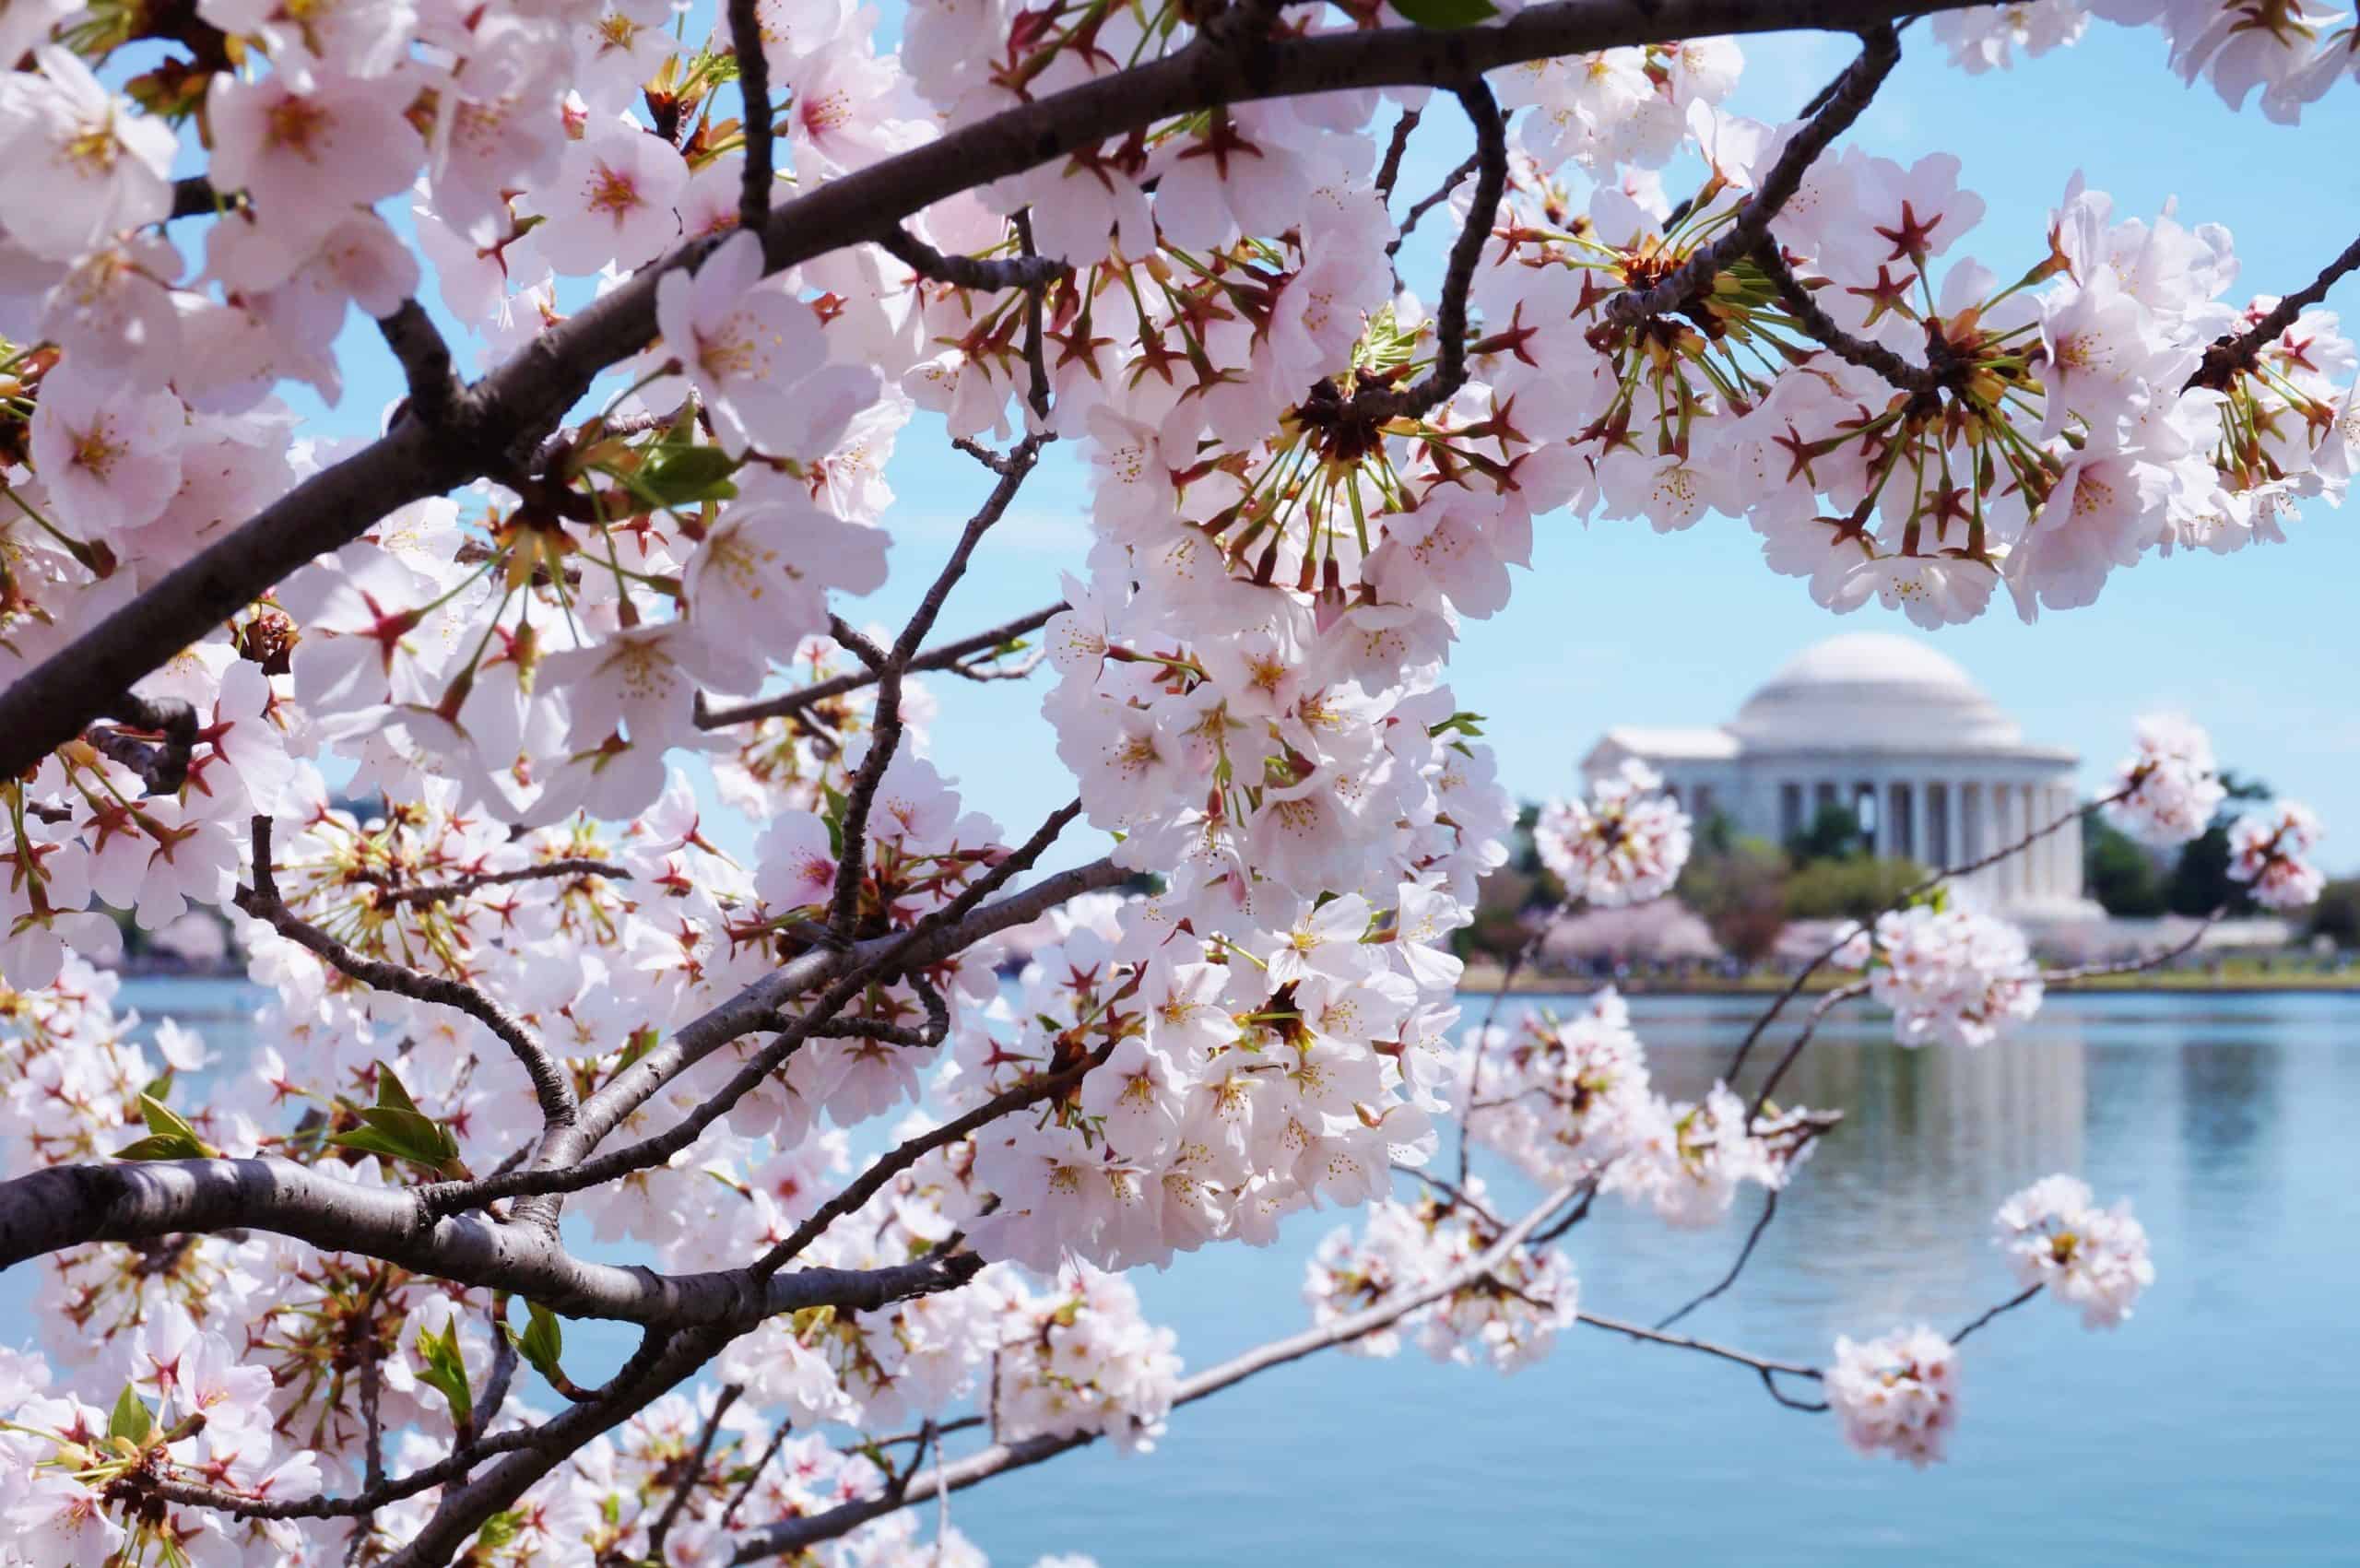 How to See the Washington DC Cherry Blossoms Safely in 2021